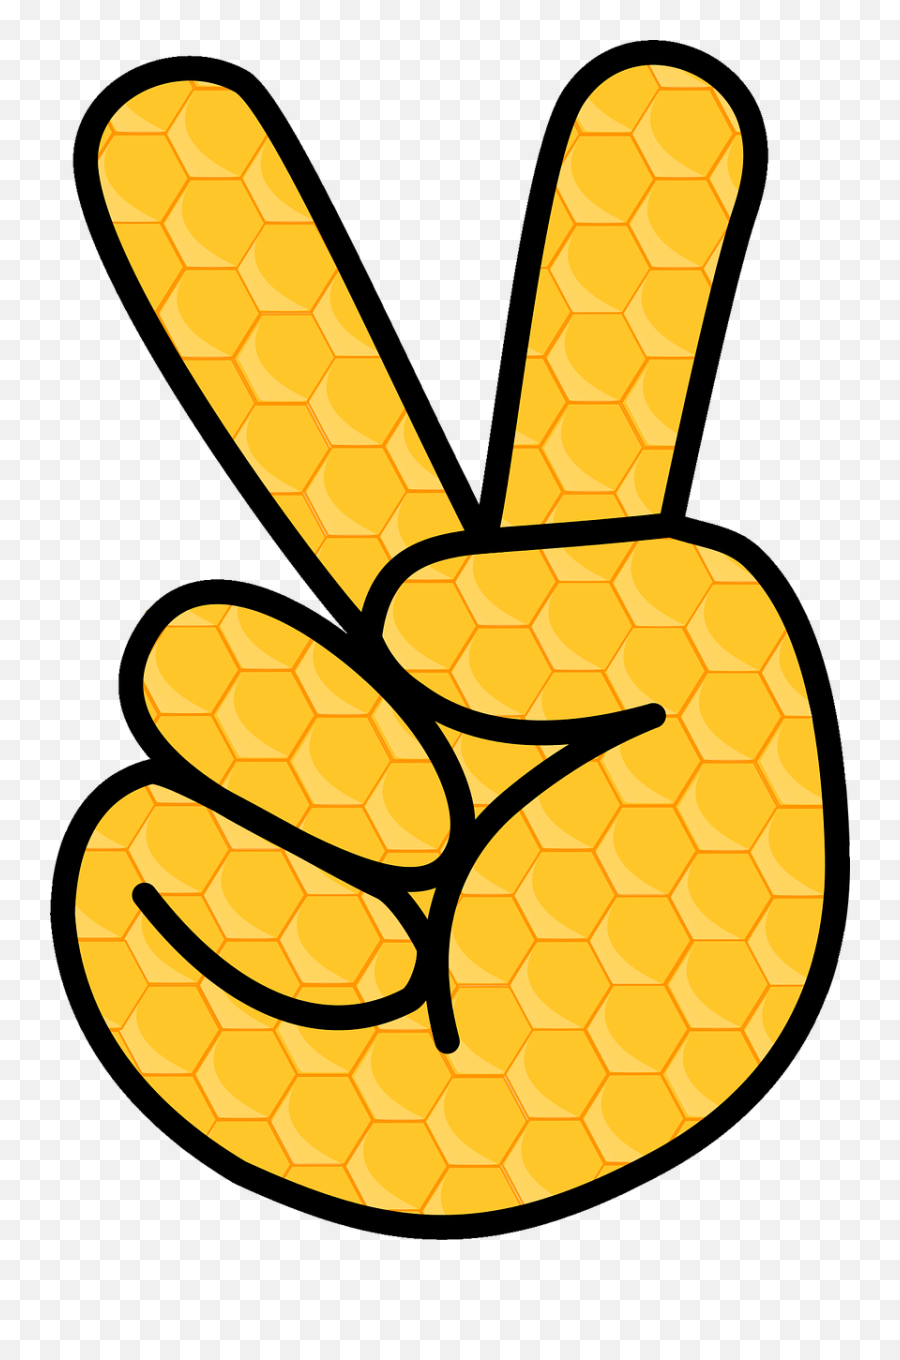 Peace Sign Hand Svg Png Image With No Emoji,Peace Fingers Emoji Facebook